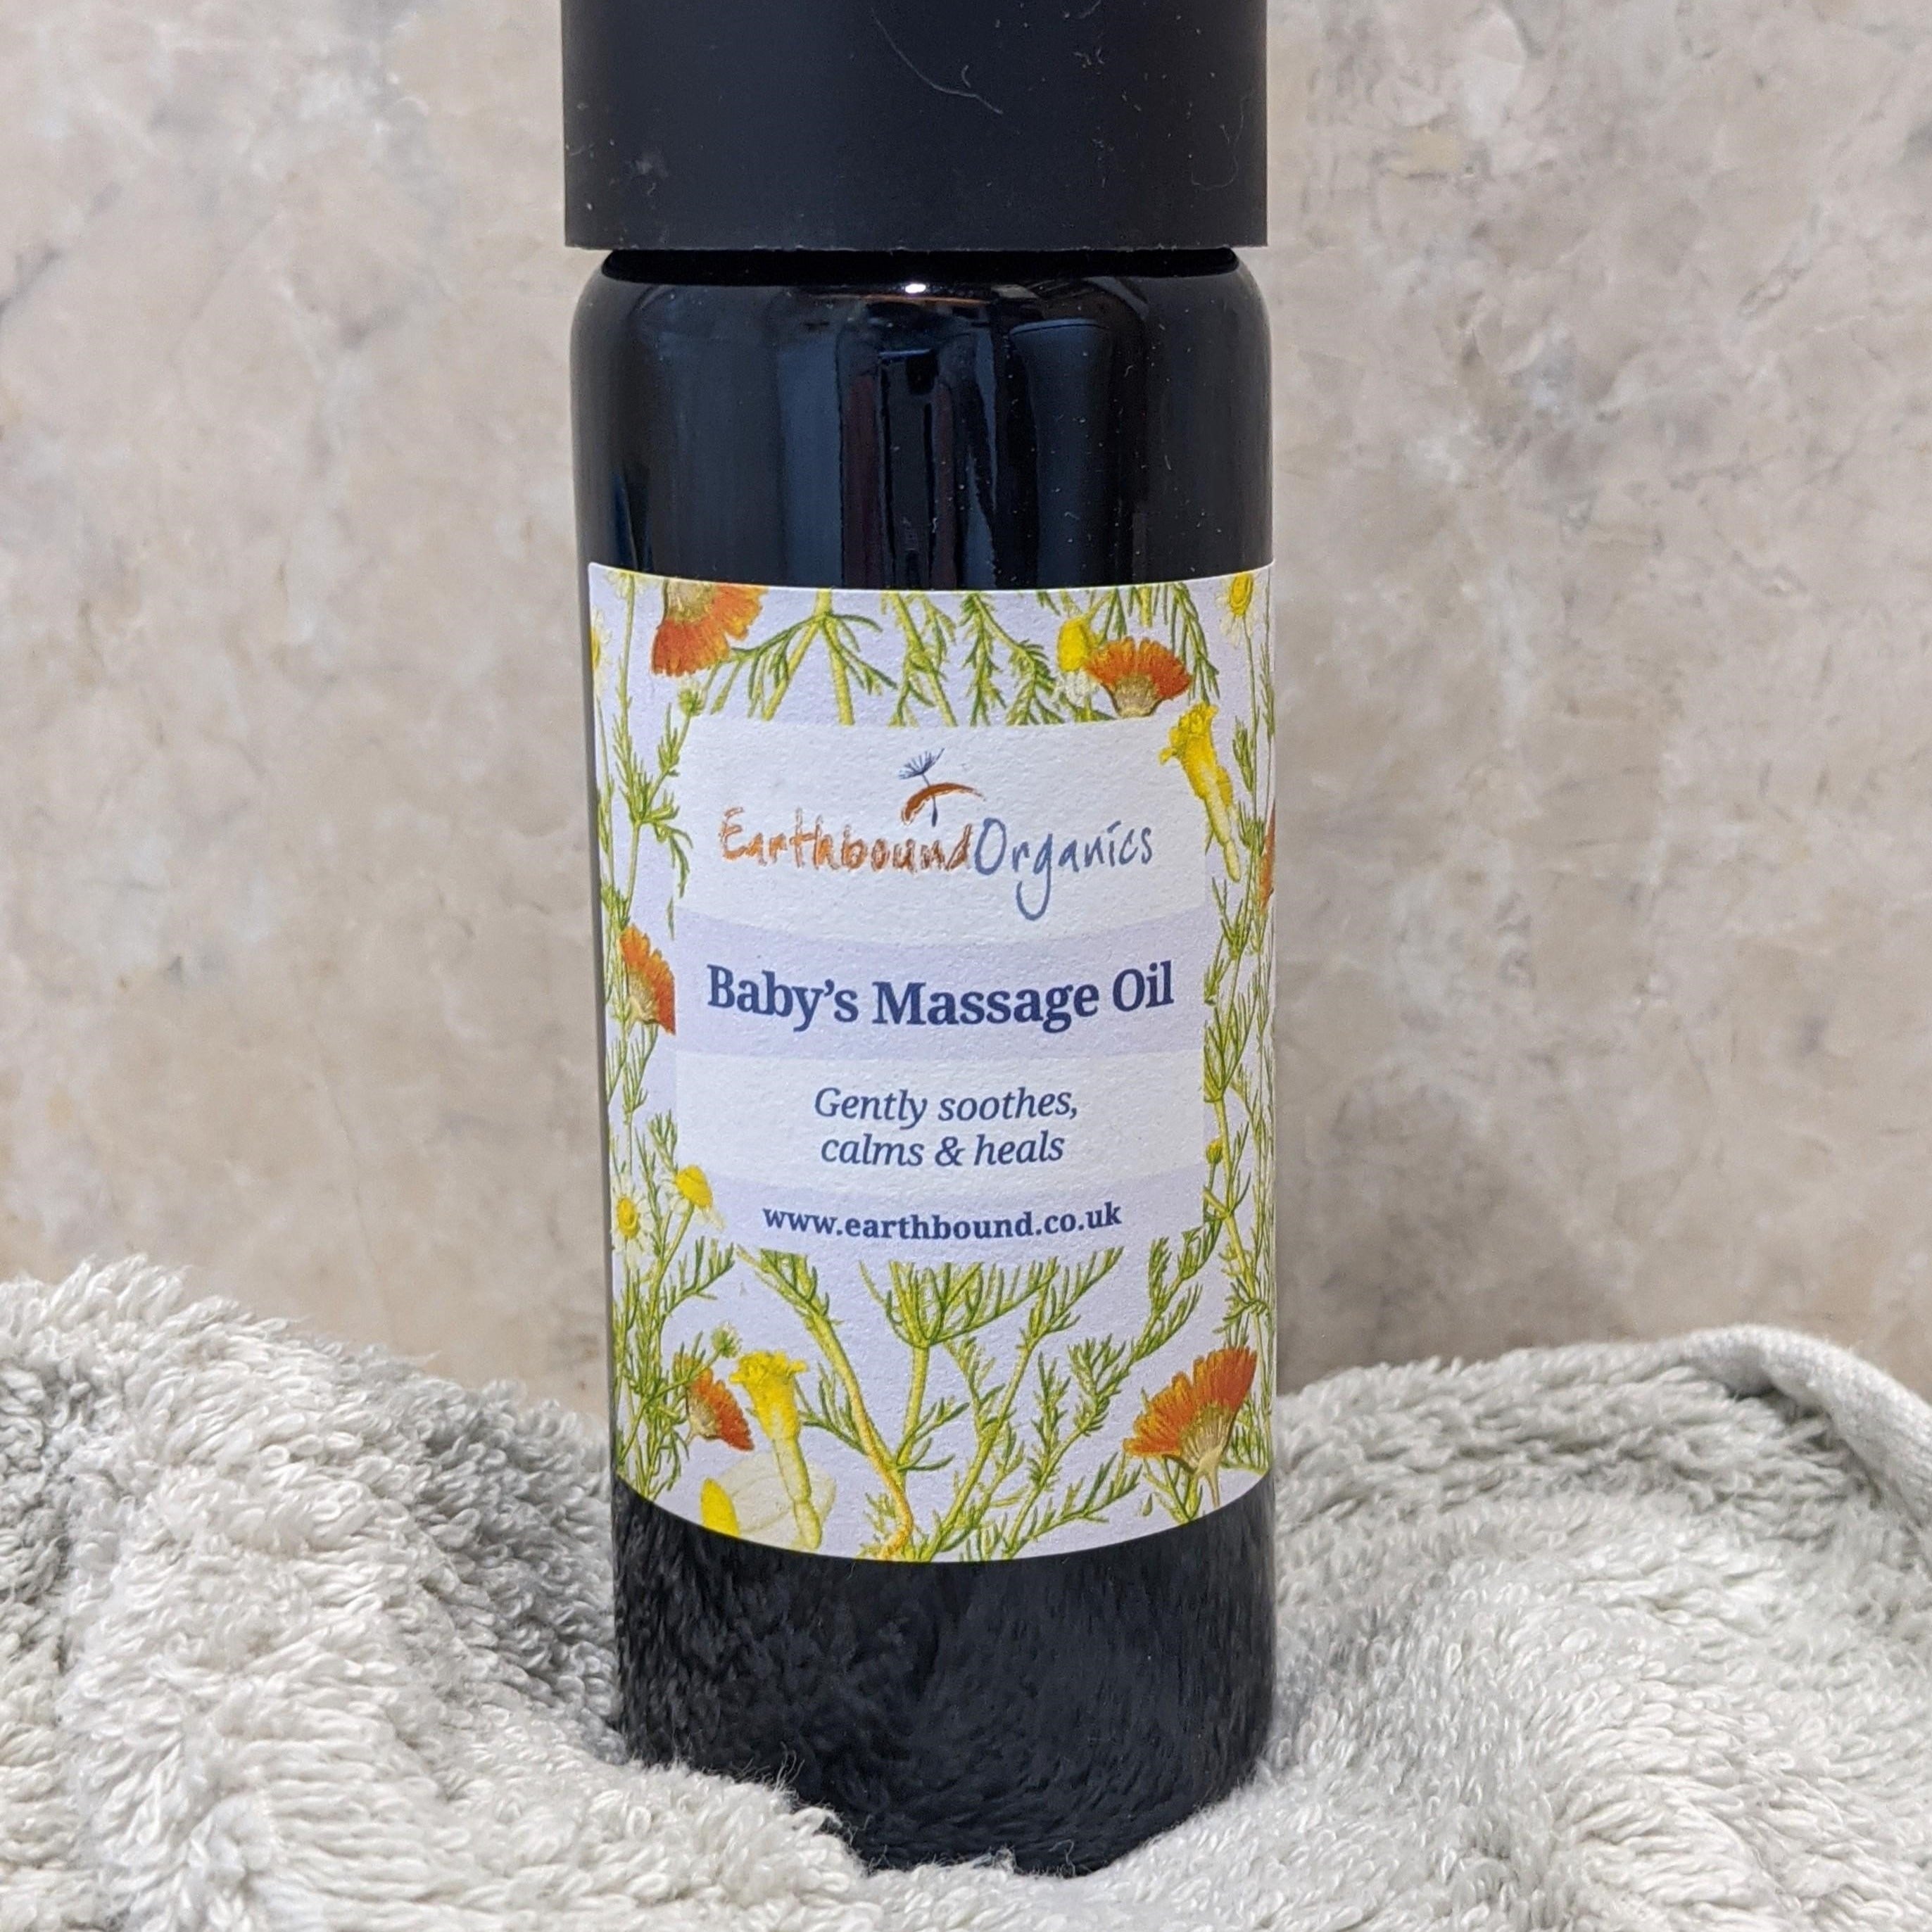 Baby's Massage Oil 100ml - New Improved with added Lavender